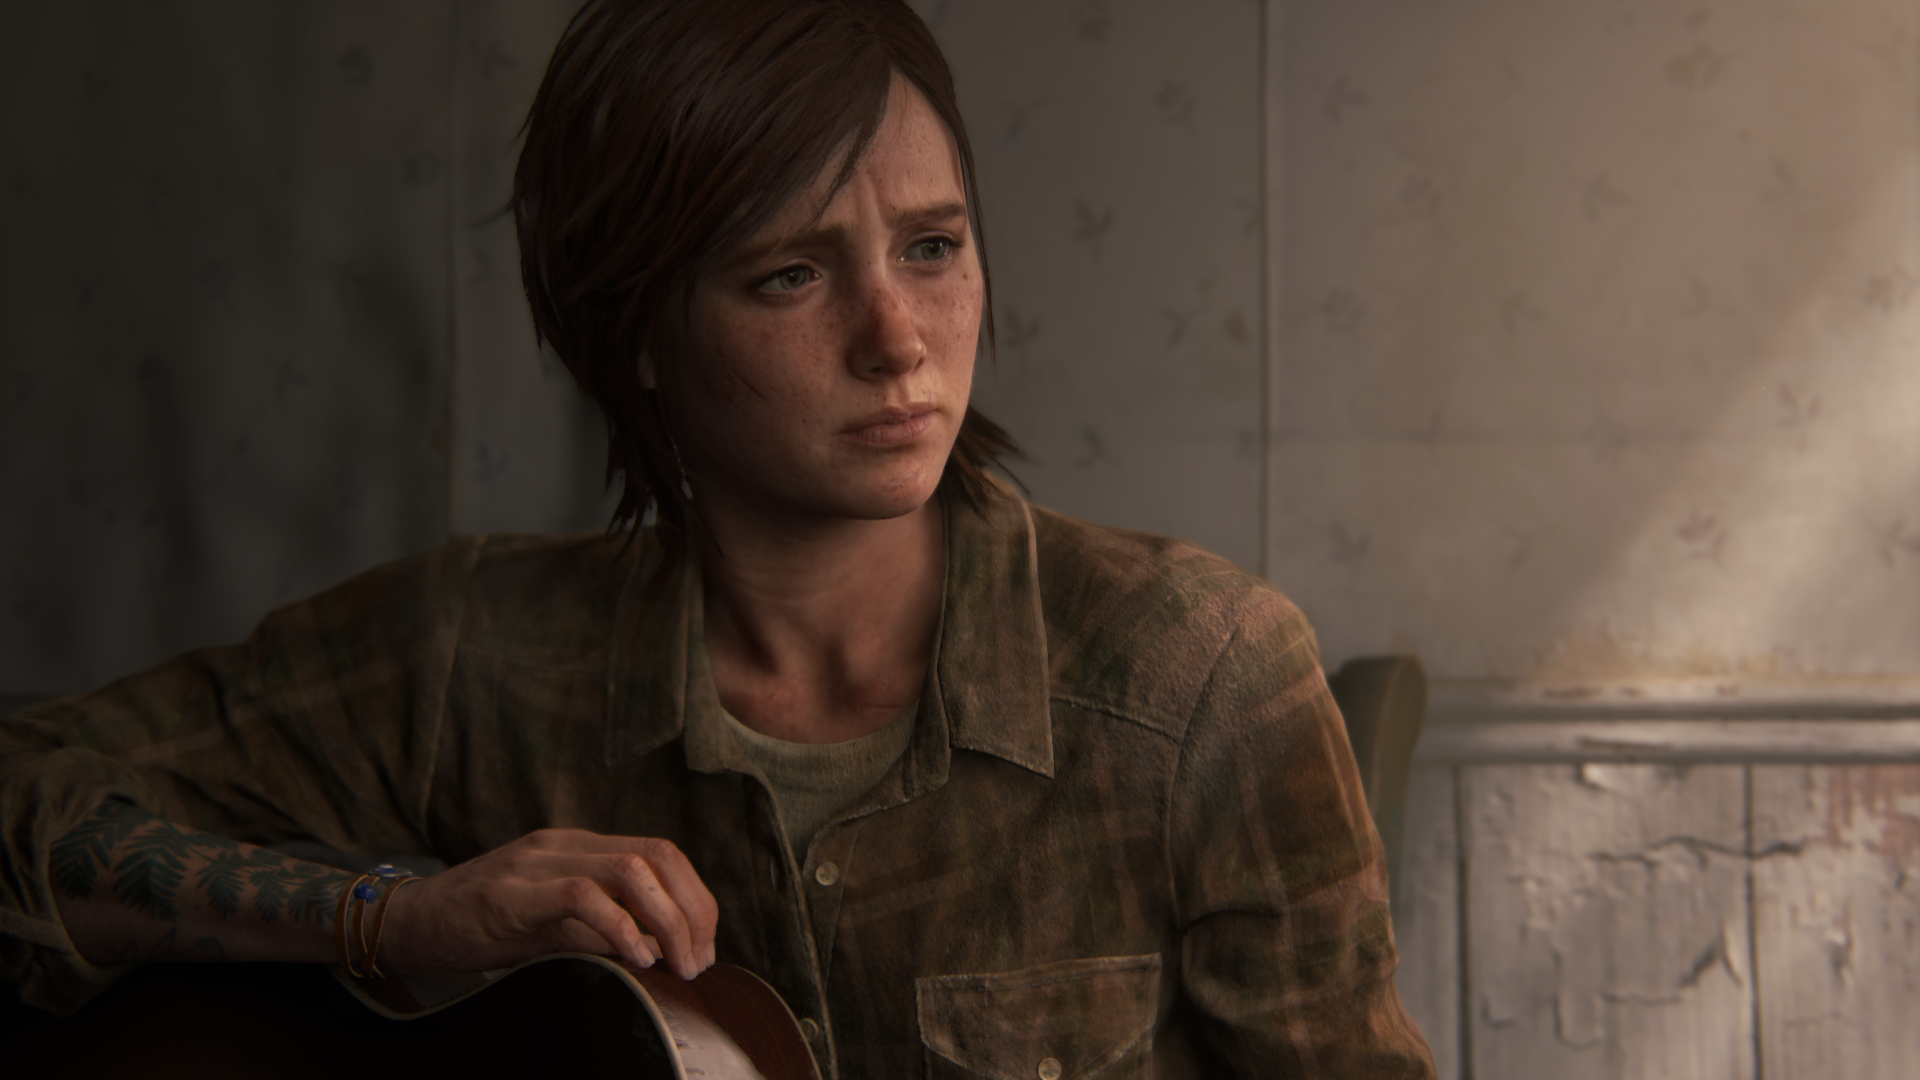 The Last Of Us 2 Video Games Screen Shot Naughty Dog PlayStation 4 Ellie 1920x1080